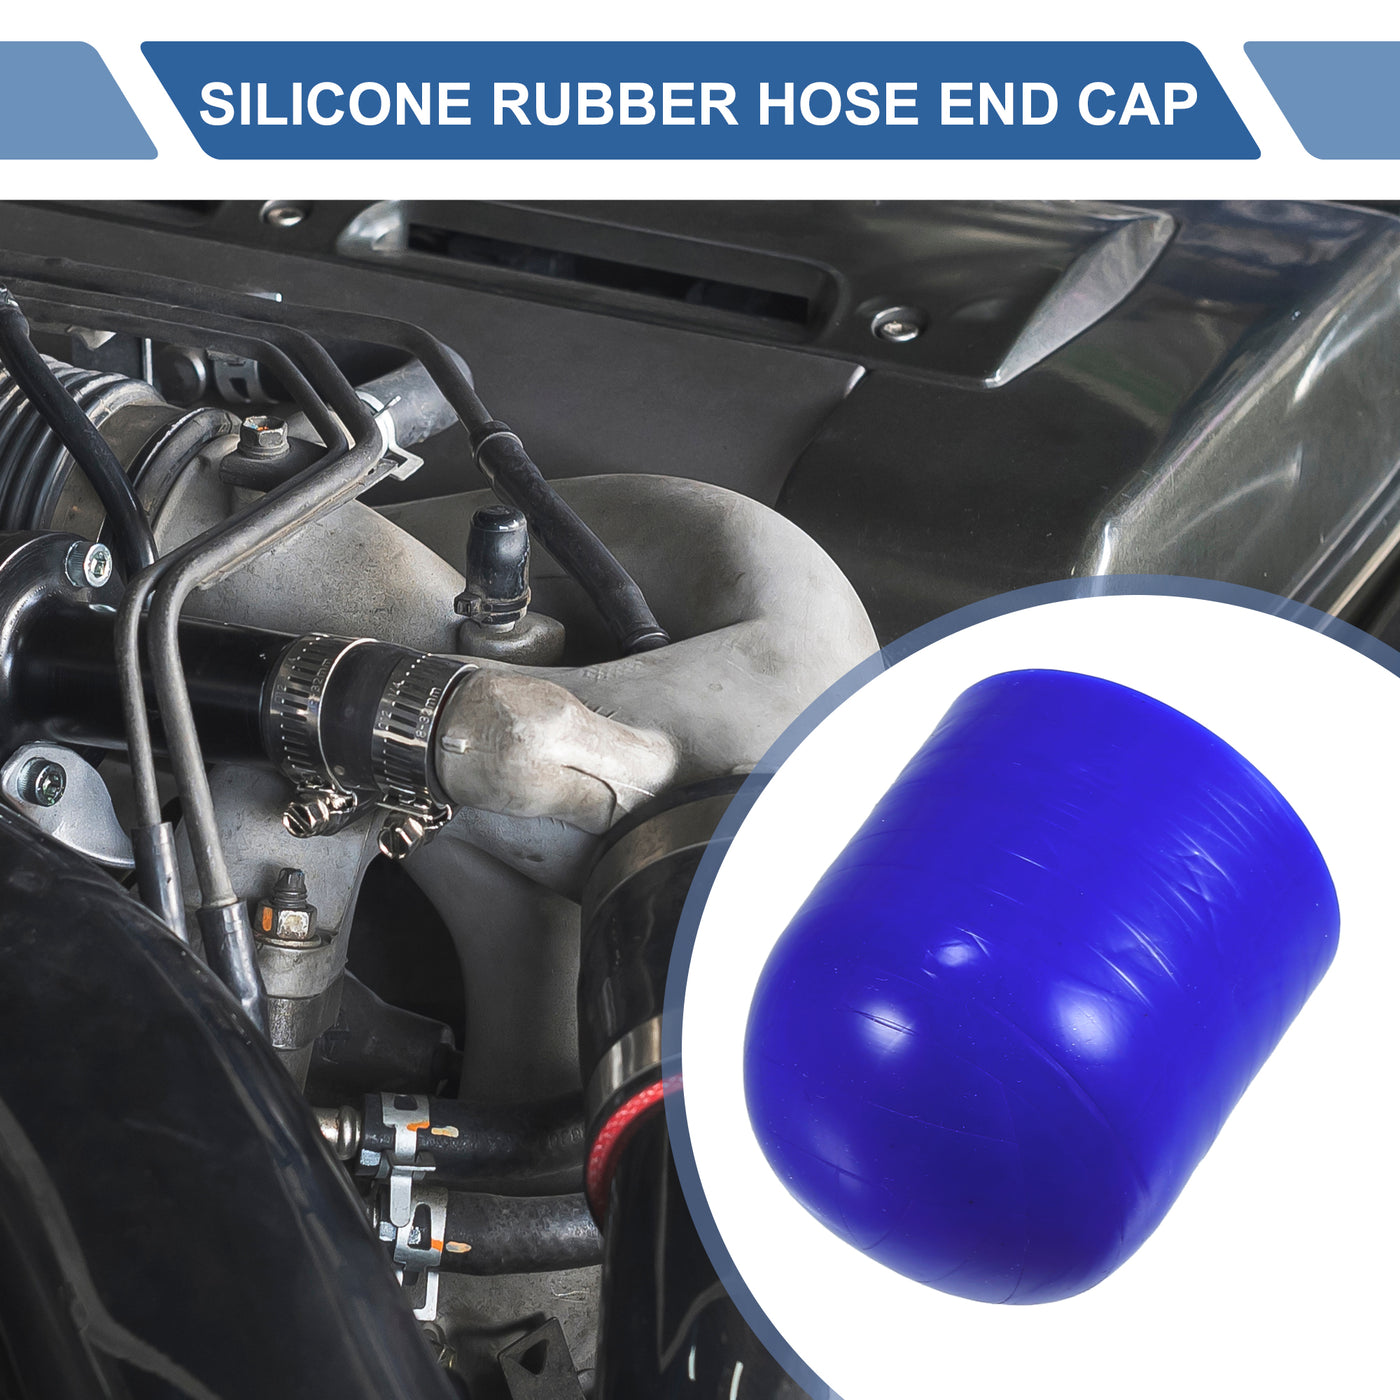 X AUTOHAUX 1 Set 30mm Length 32mm/1.26" ID Blue Car Silicone Rubber Hose End Cap with Clamps Silicone Reinforced Blanking Cap for Bypass Tube Universal